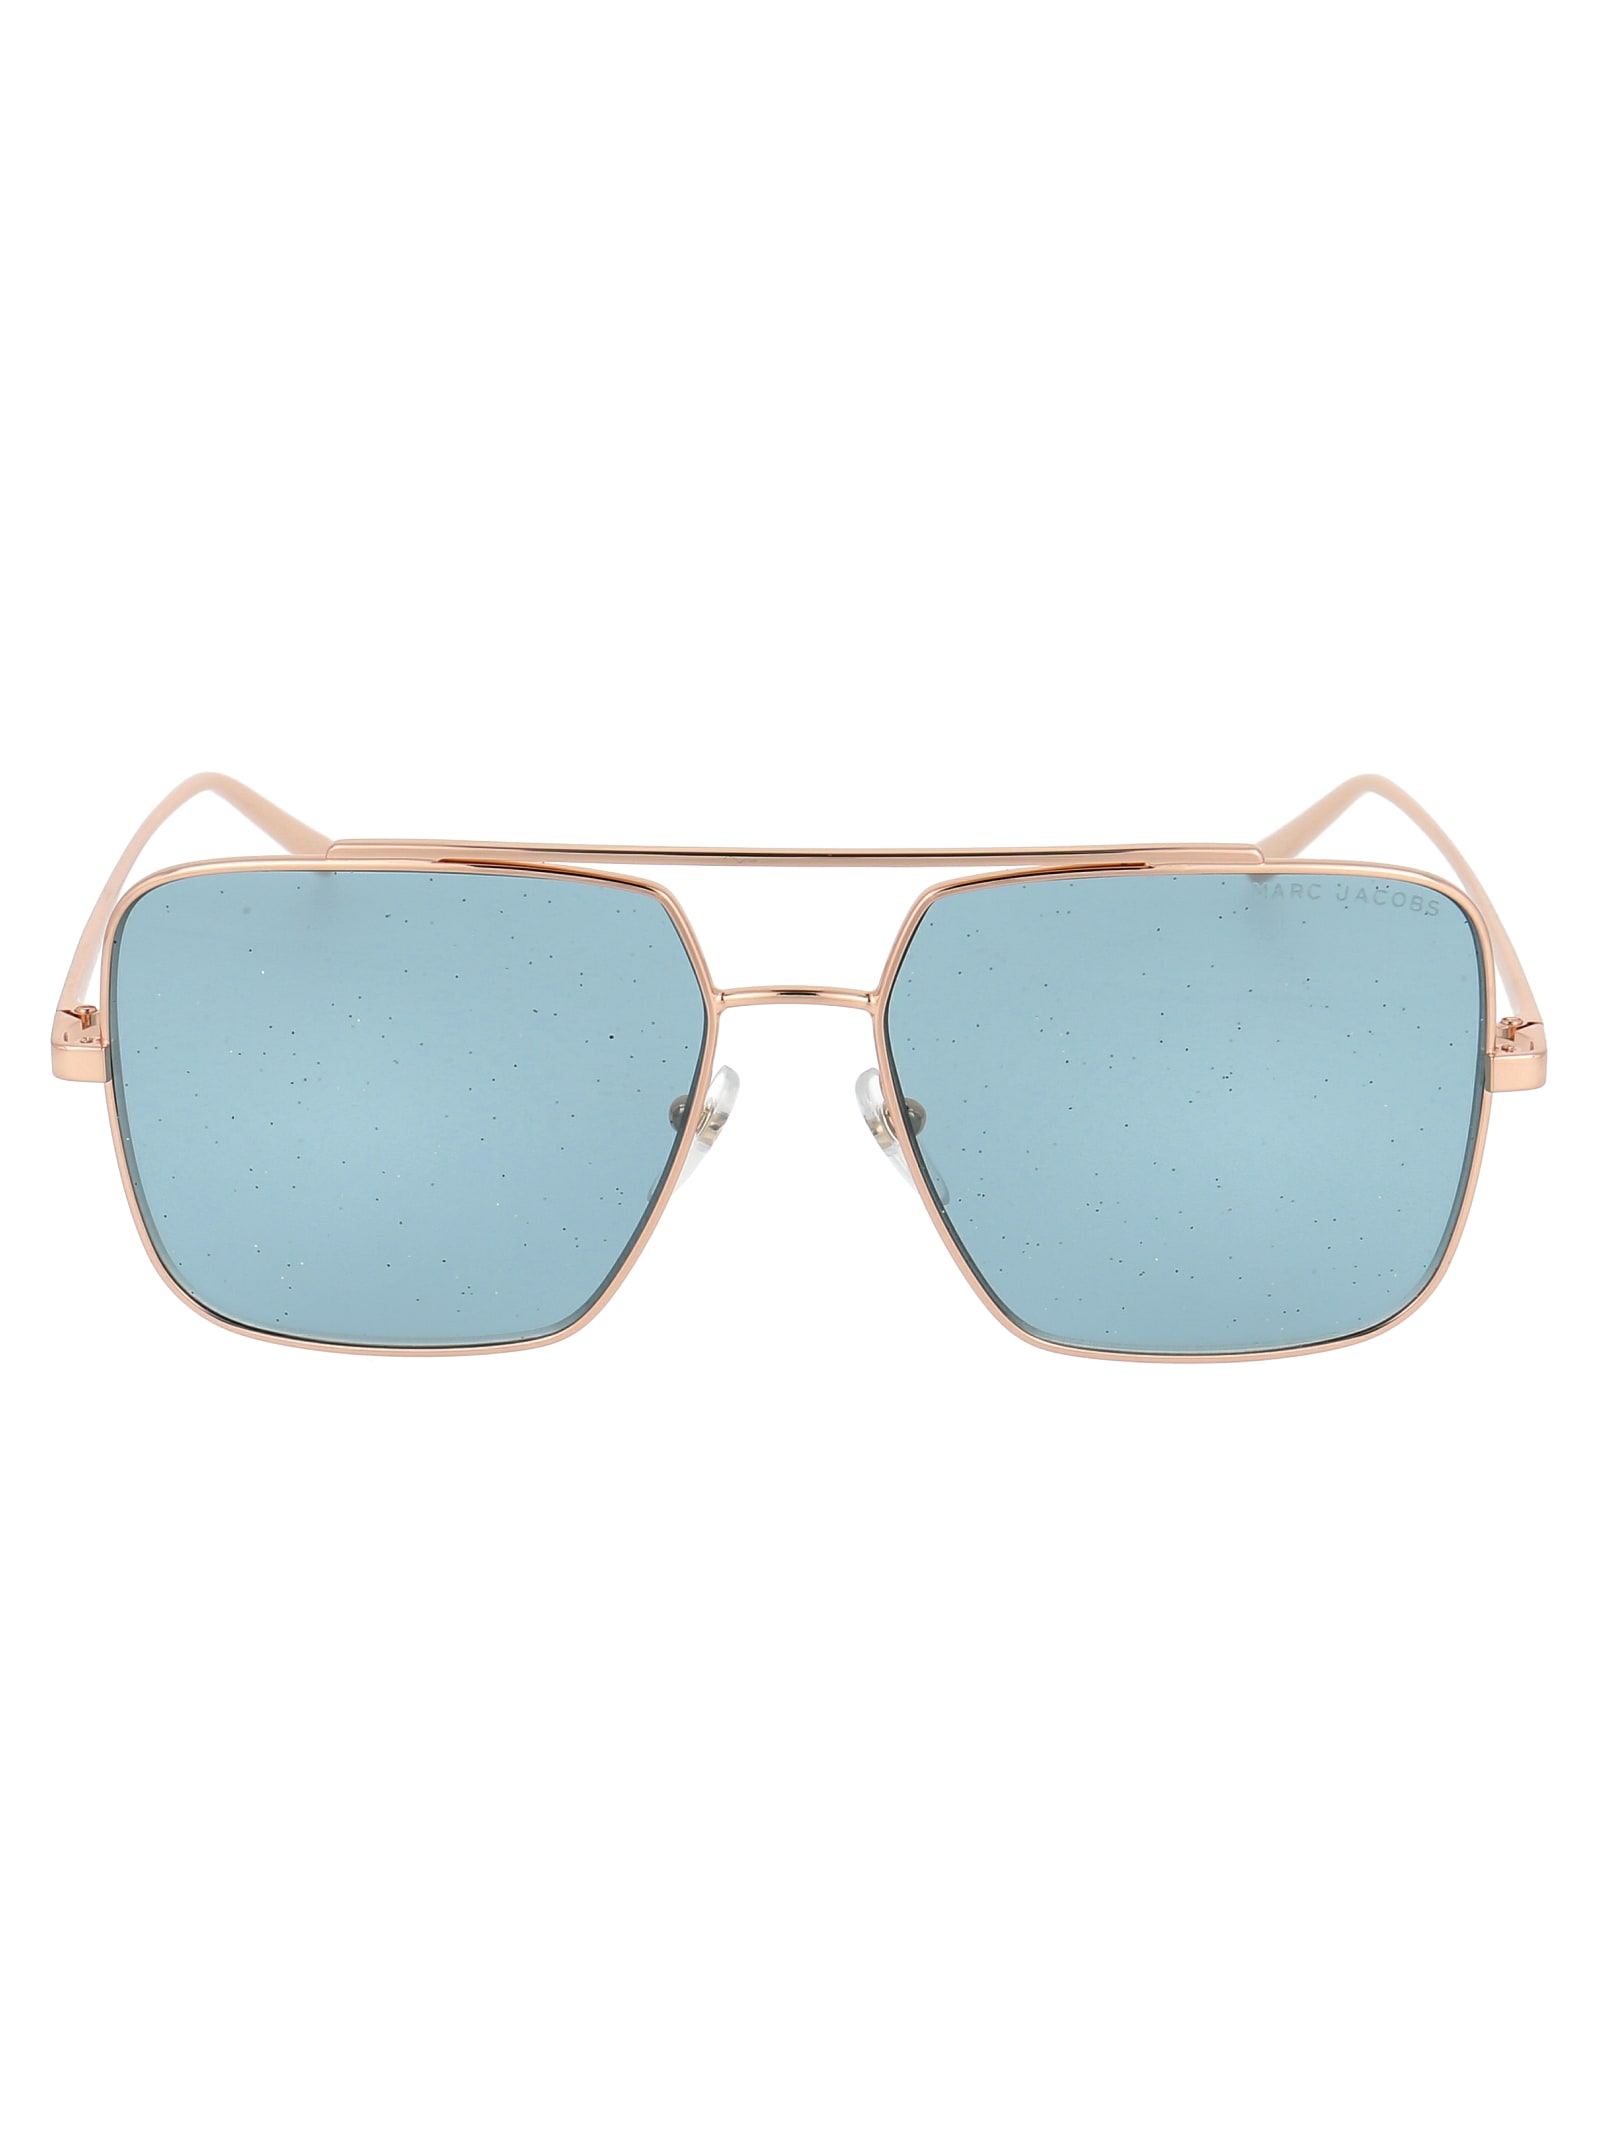 Marc Jacobs Sunglasses In Ddbhm Gold Copper